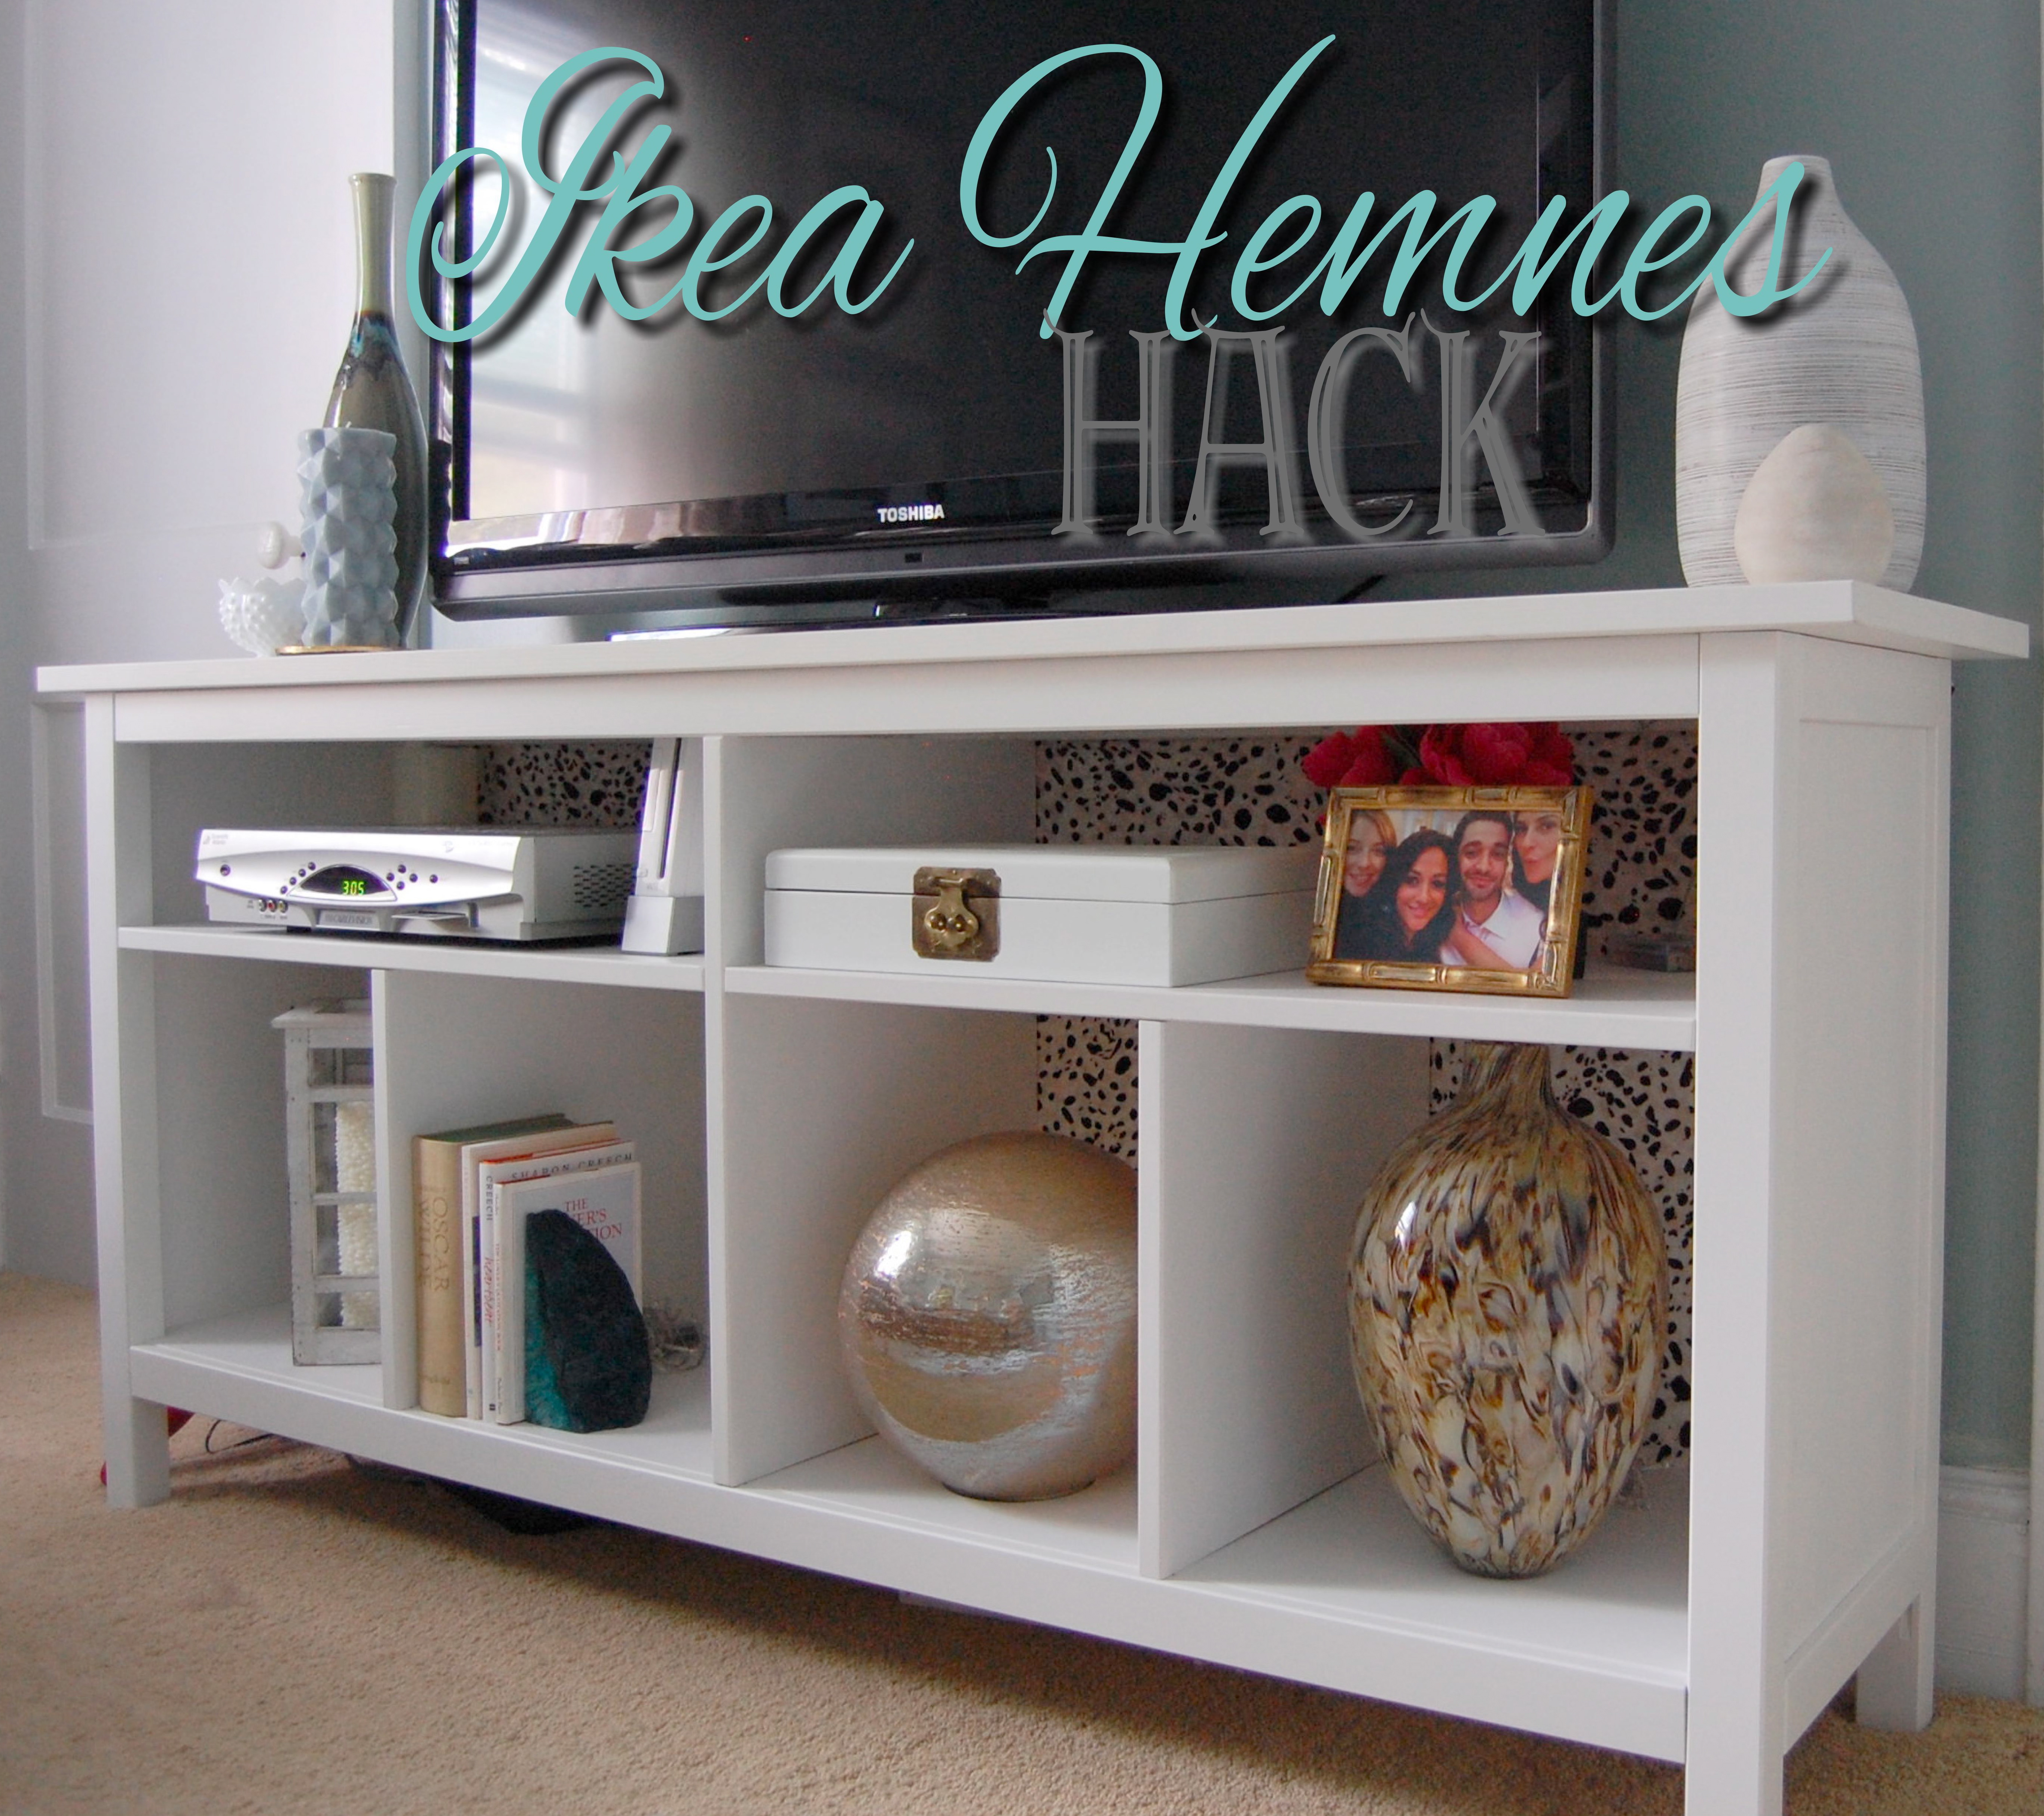 Tall TV stand - small budget hack for big TV - IKEA Hackers